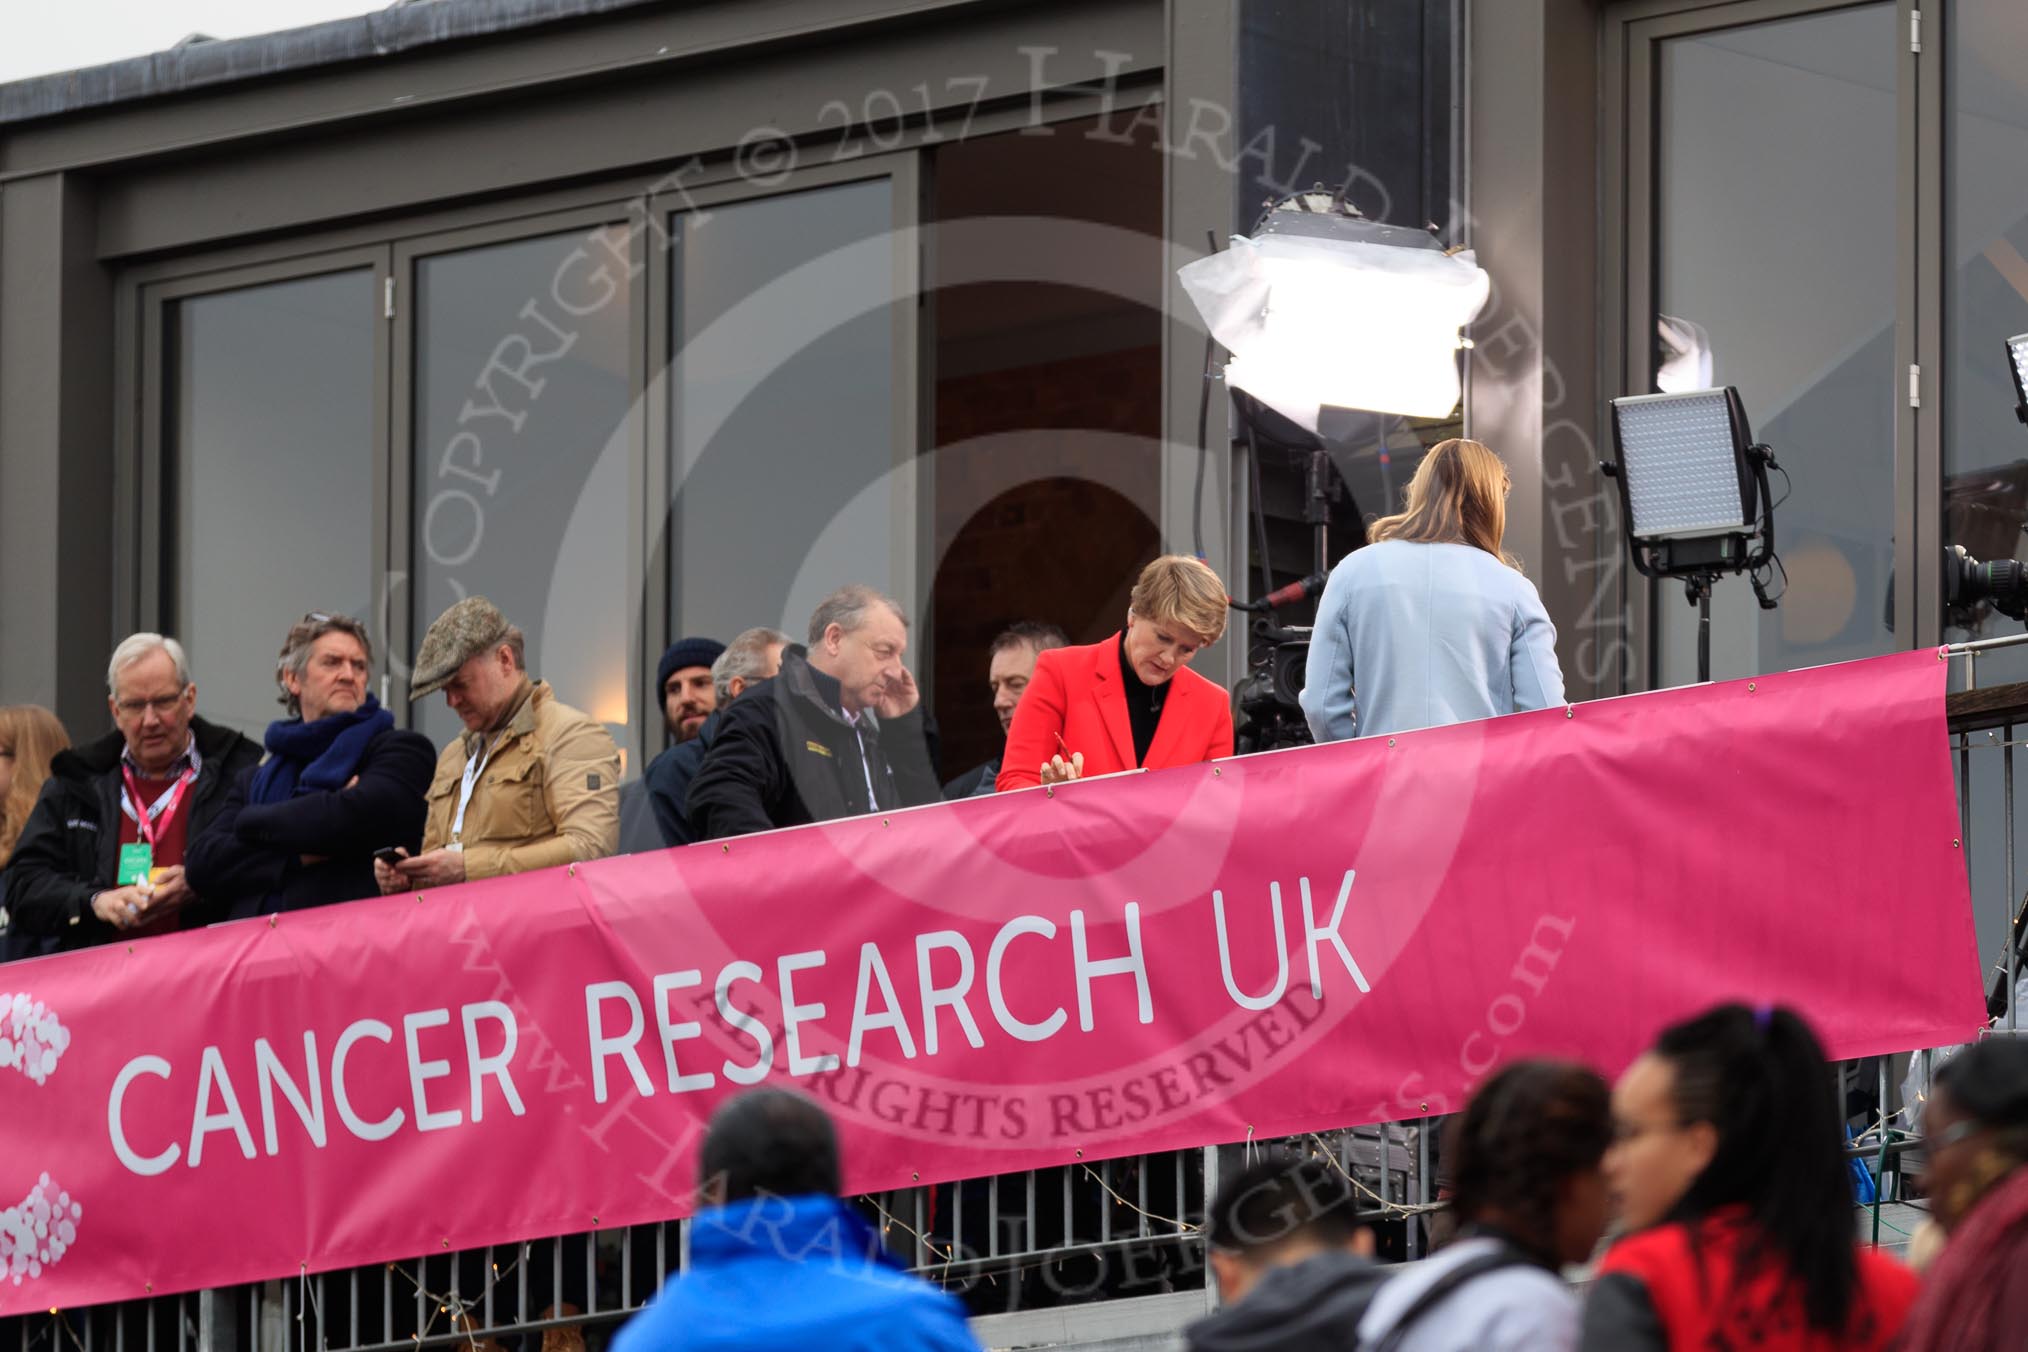 The Cancer Research UK Women's Boat Race 2018: BBC presenter Clare Balding on the balcony of the Thames RC boathouse, the media centre during race day.
River Thames between Putney Bridge and Mortlake,
London SW15,

United Kingdom,
on 24 March 2018 at 15:41, image #87